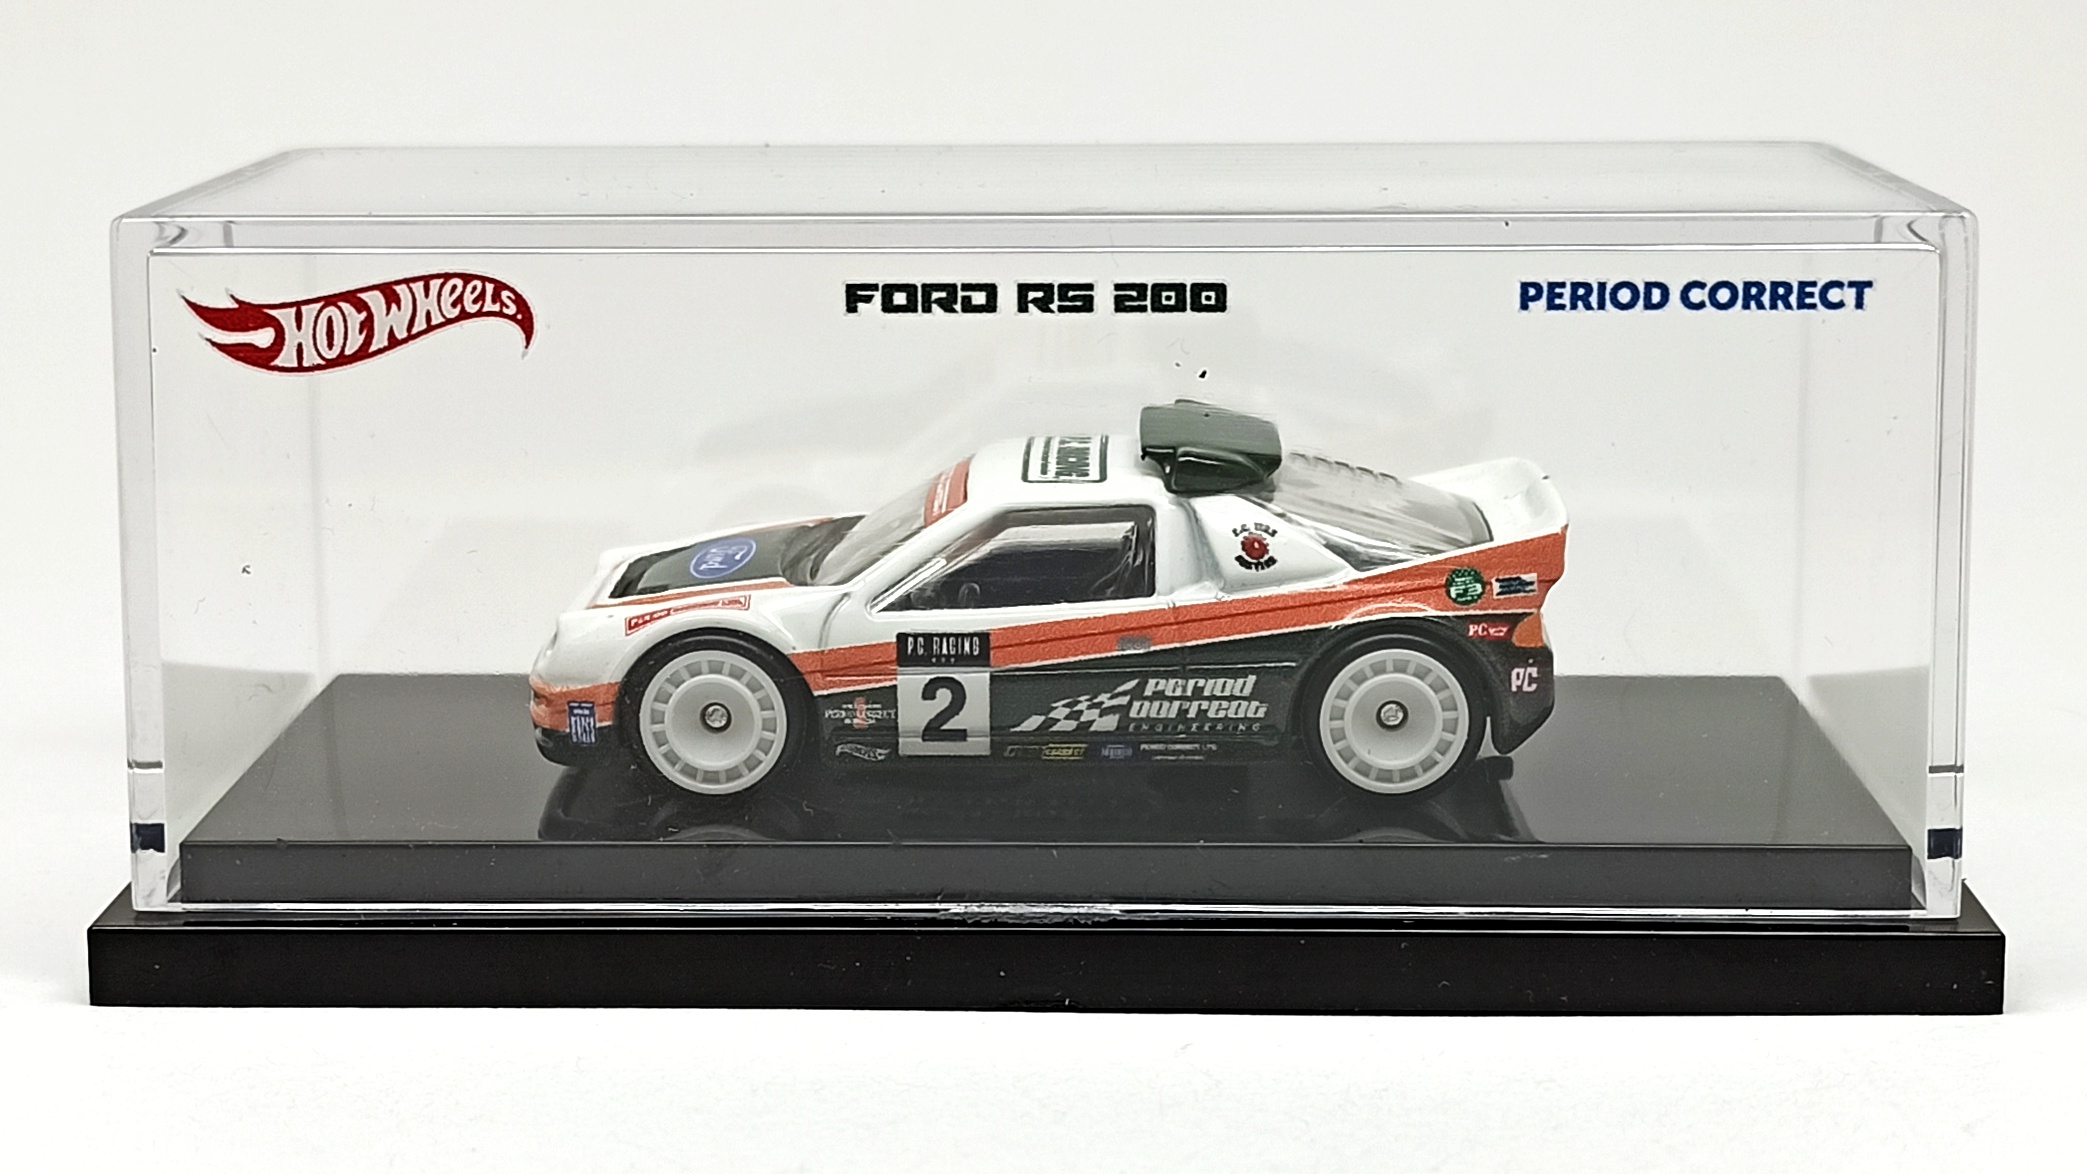 Hot Wheels Ford RS 200 (BF032) 2021 Period Correct white